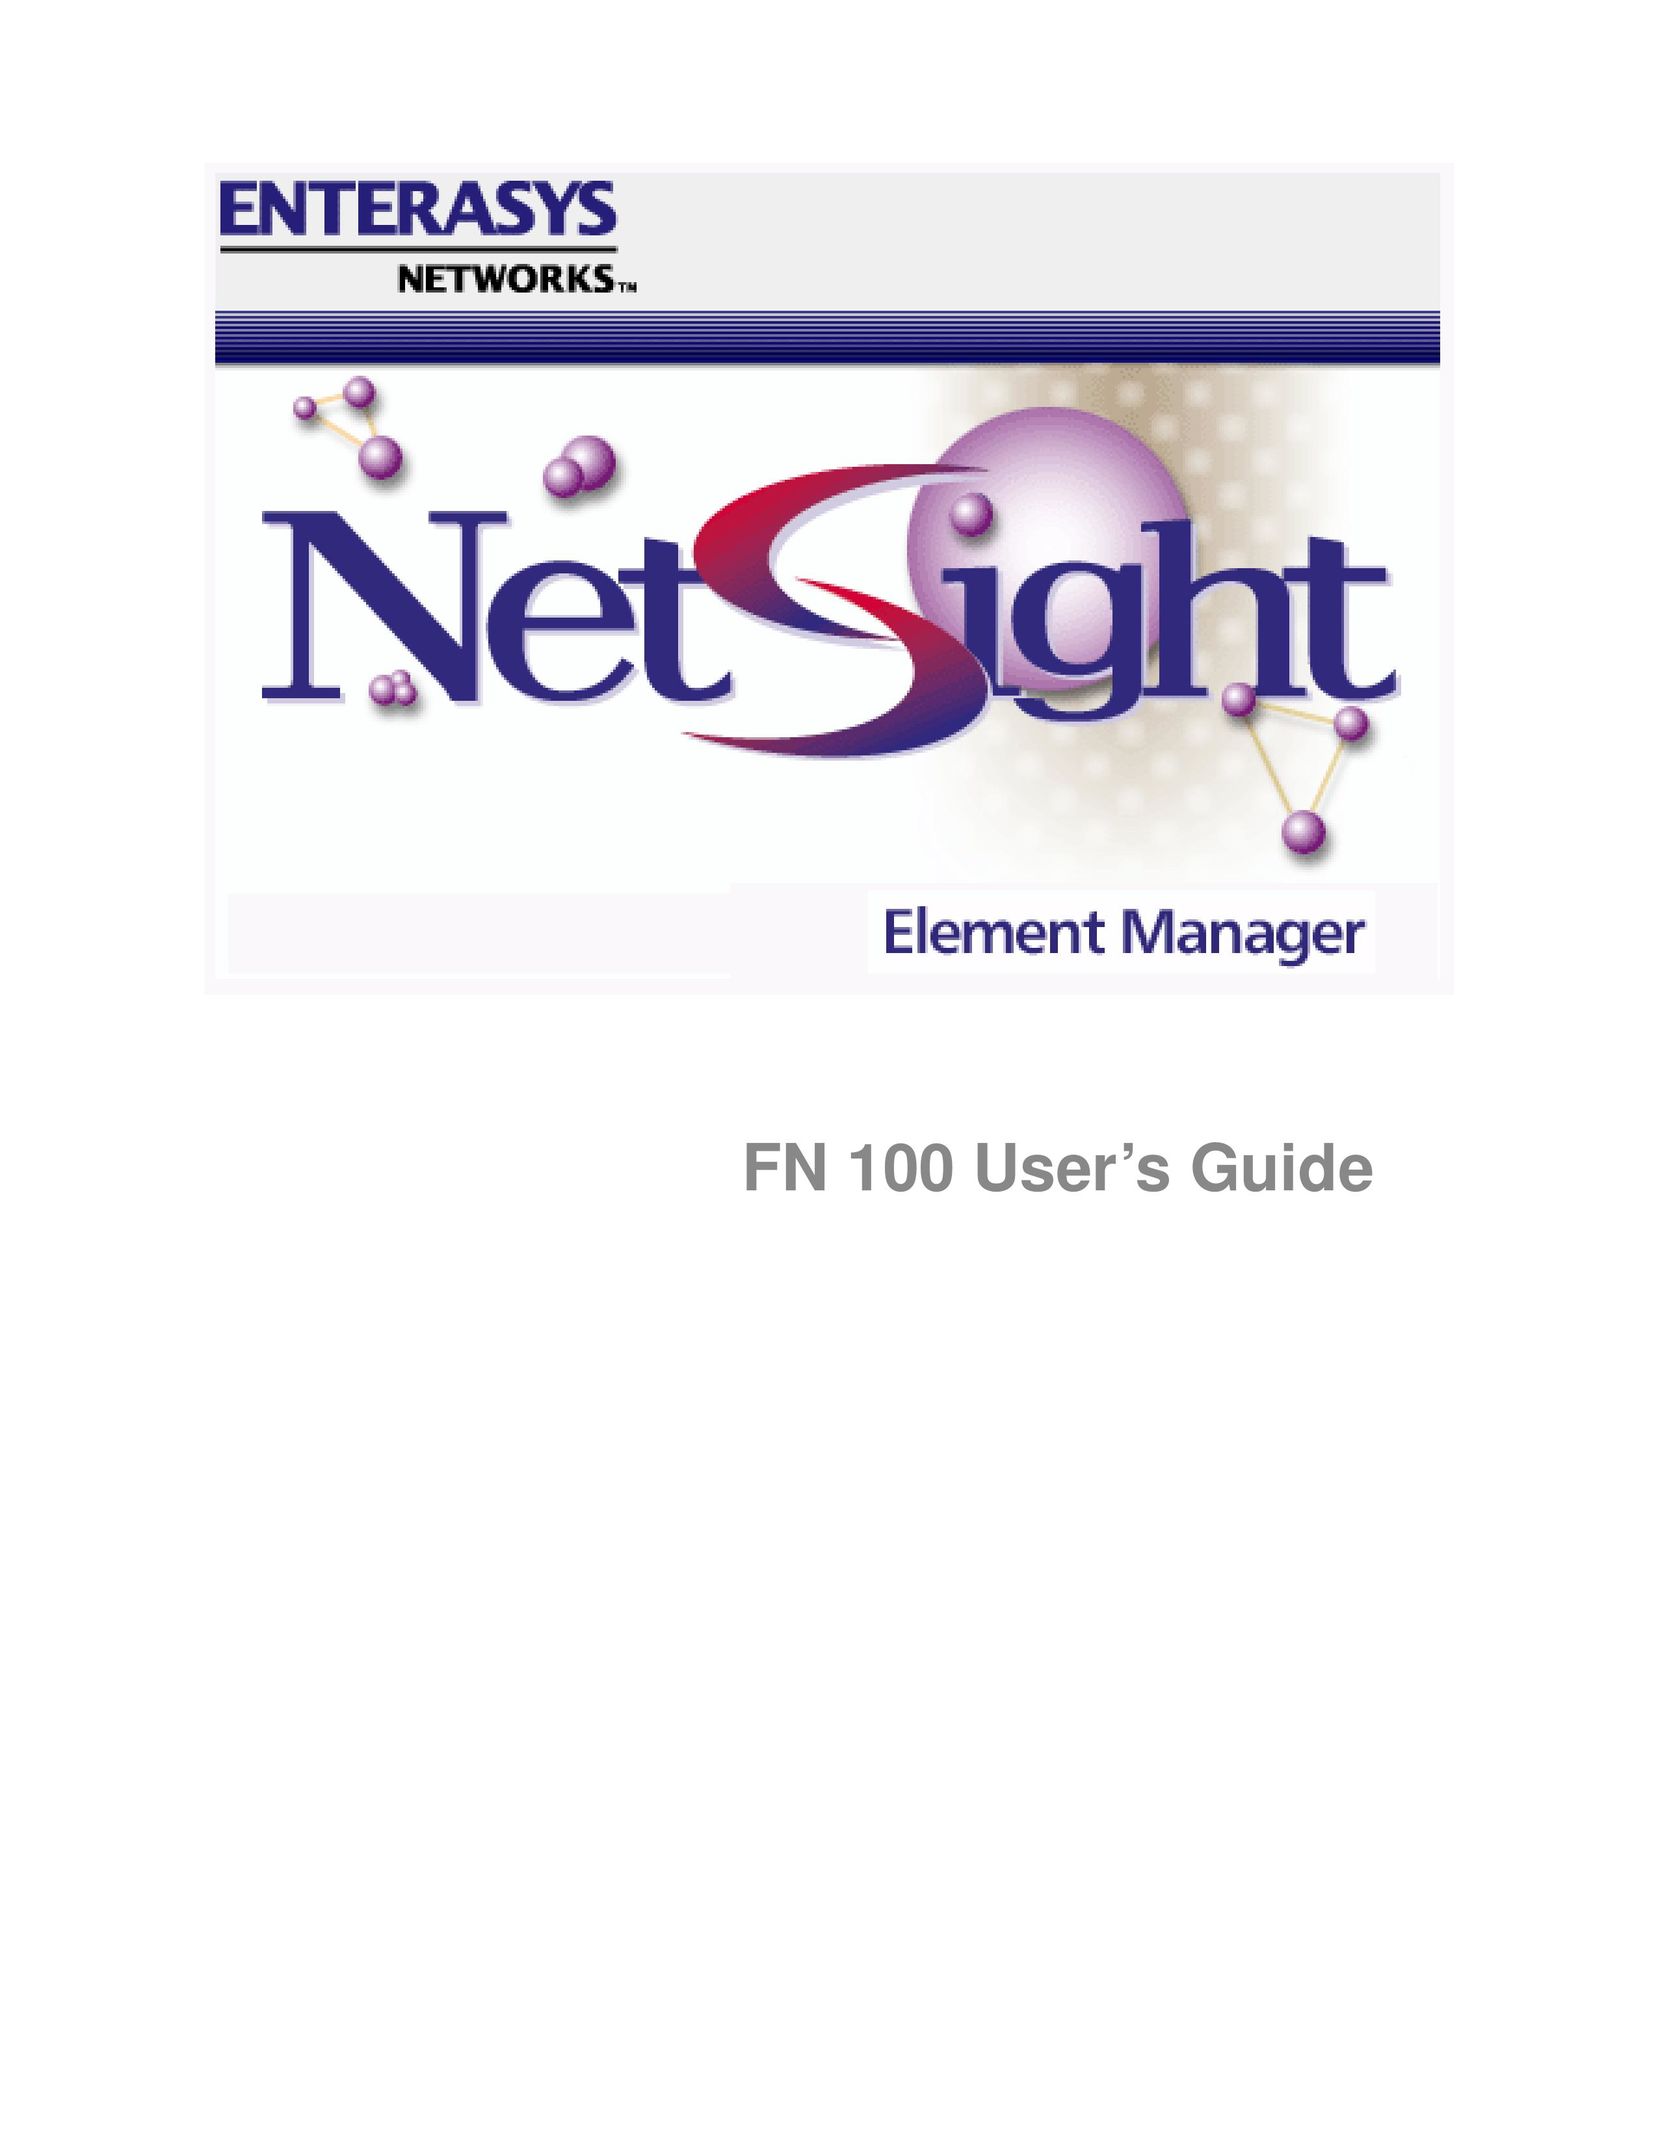 Enterasys Networks FN 100 Network Router User Manual